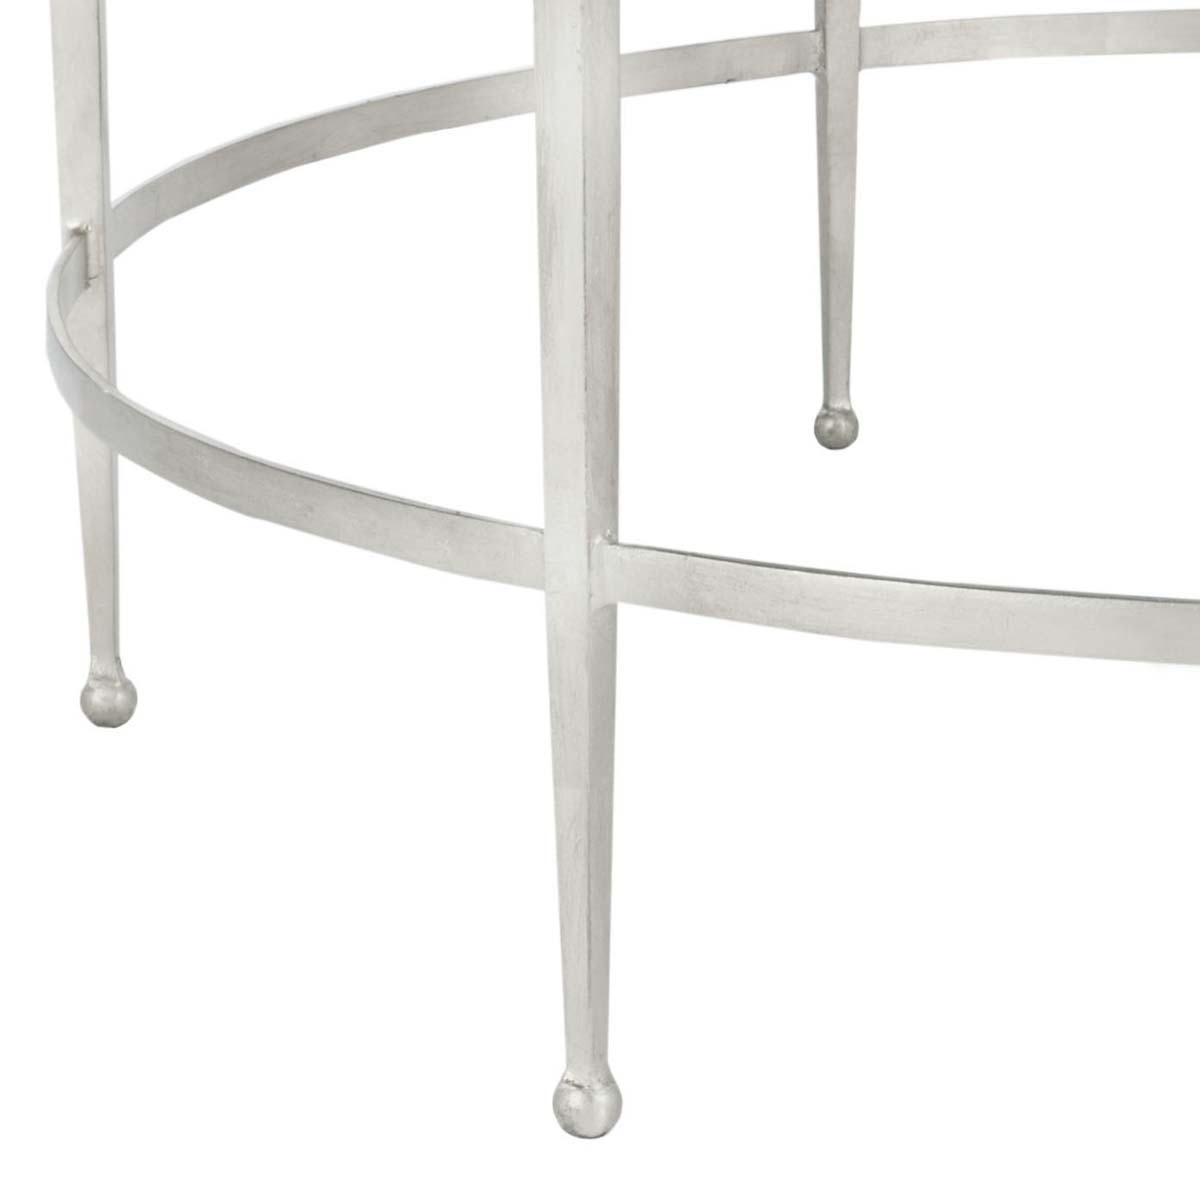 Safavieh Couture Edmund Glass Cocktail Table - Silver / Glass